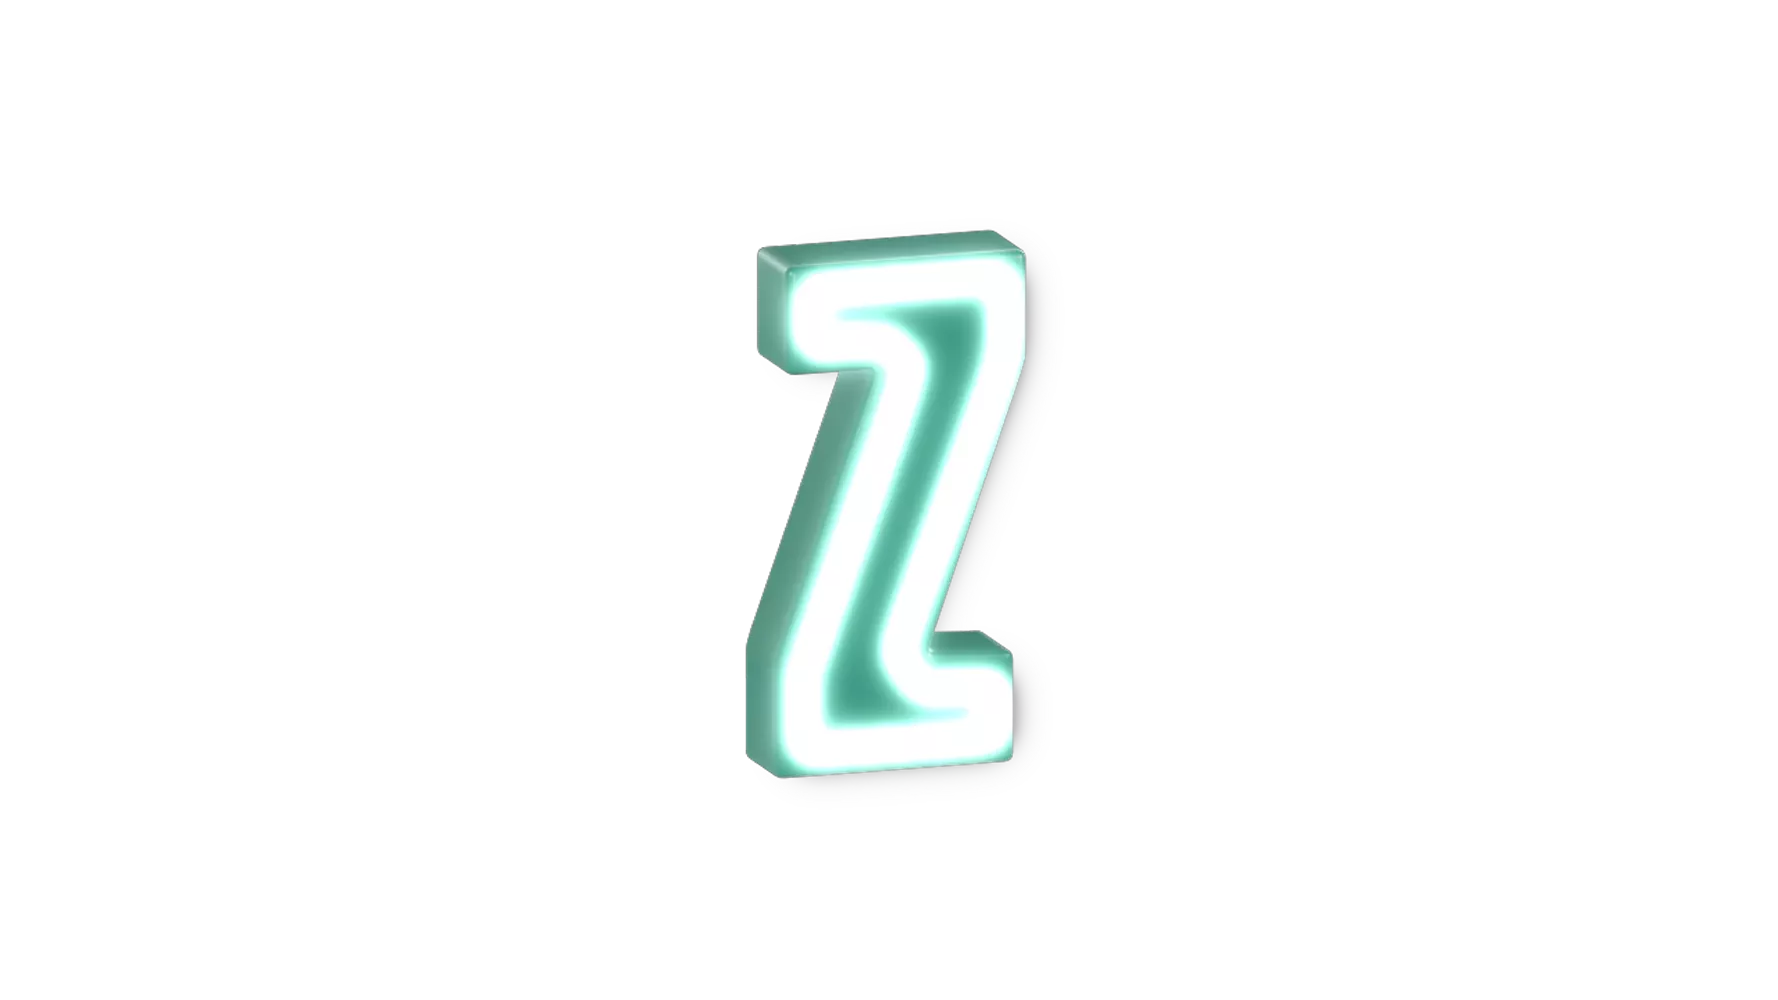 Z 3D Graphic